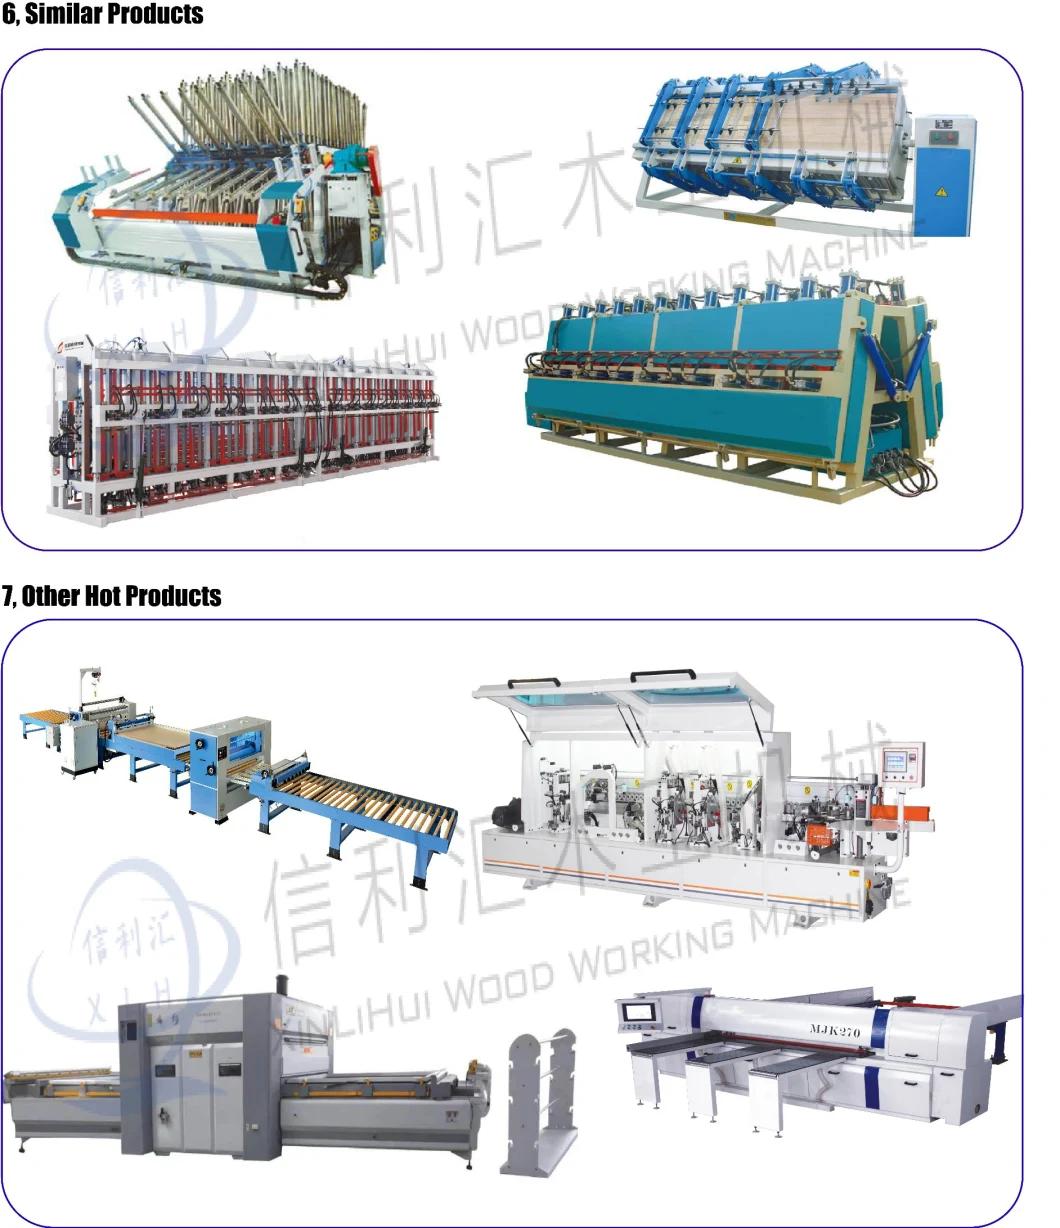 Clamp Carriers Machine Hydraulic Wood Composer Woodworking Machine / Wood Panel Assembly Machine